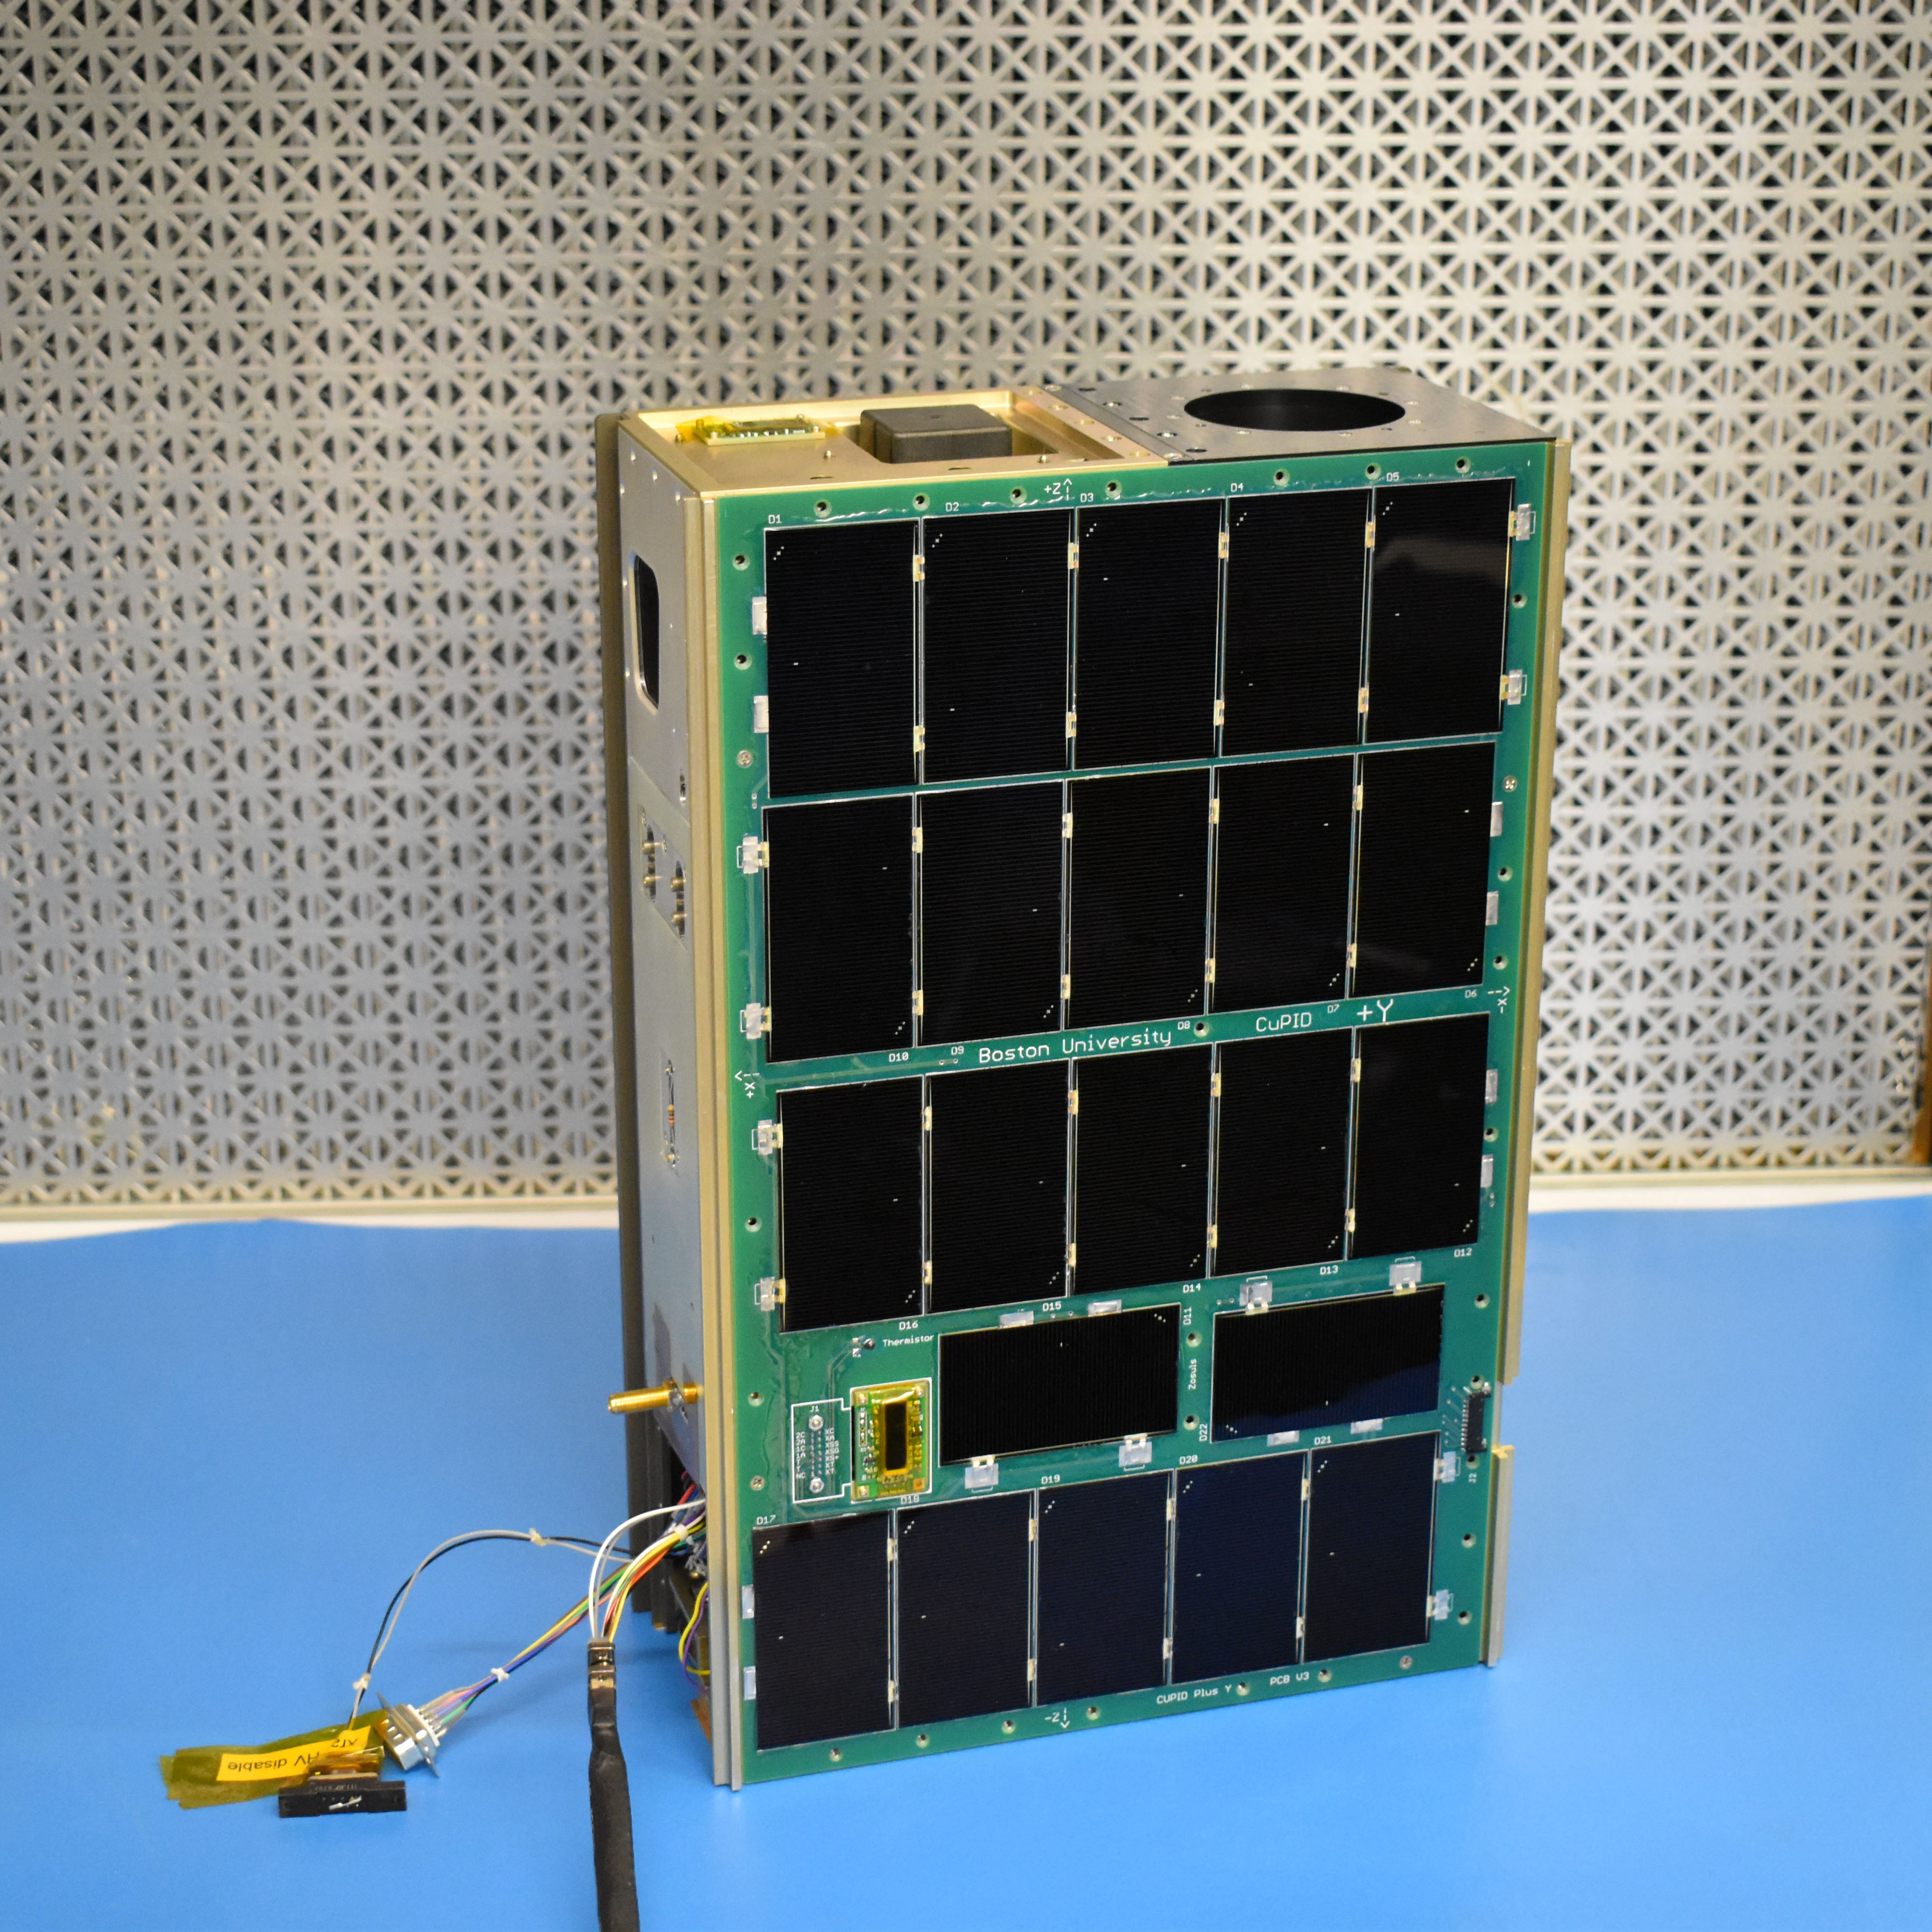 CRESST II scientist Mr. Rousseau Nutter participated in the delivery of the Cusp Plasma Imaging Detector (CuPID) cubesat